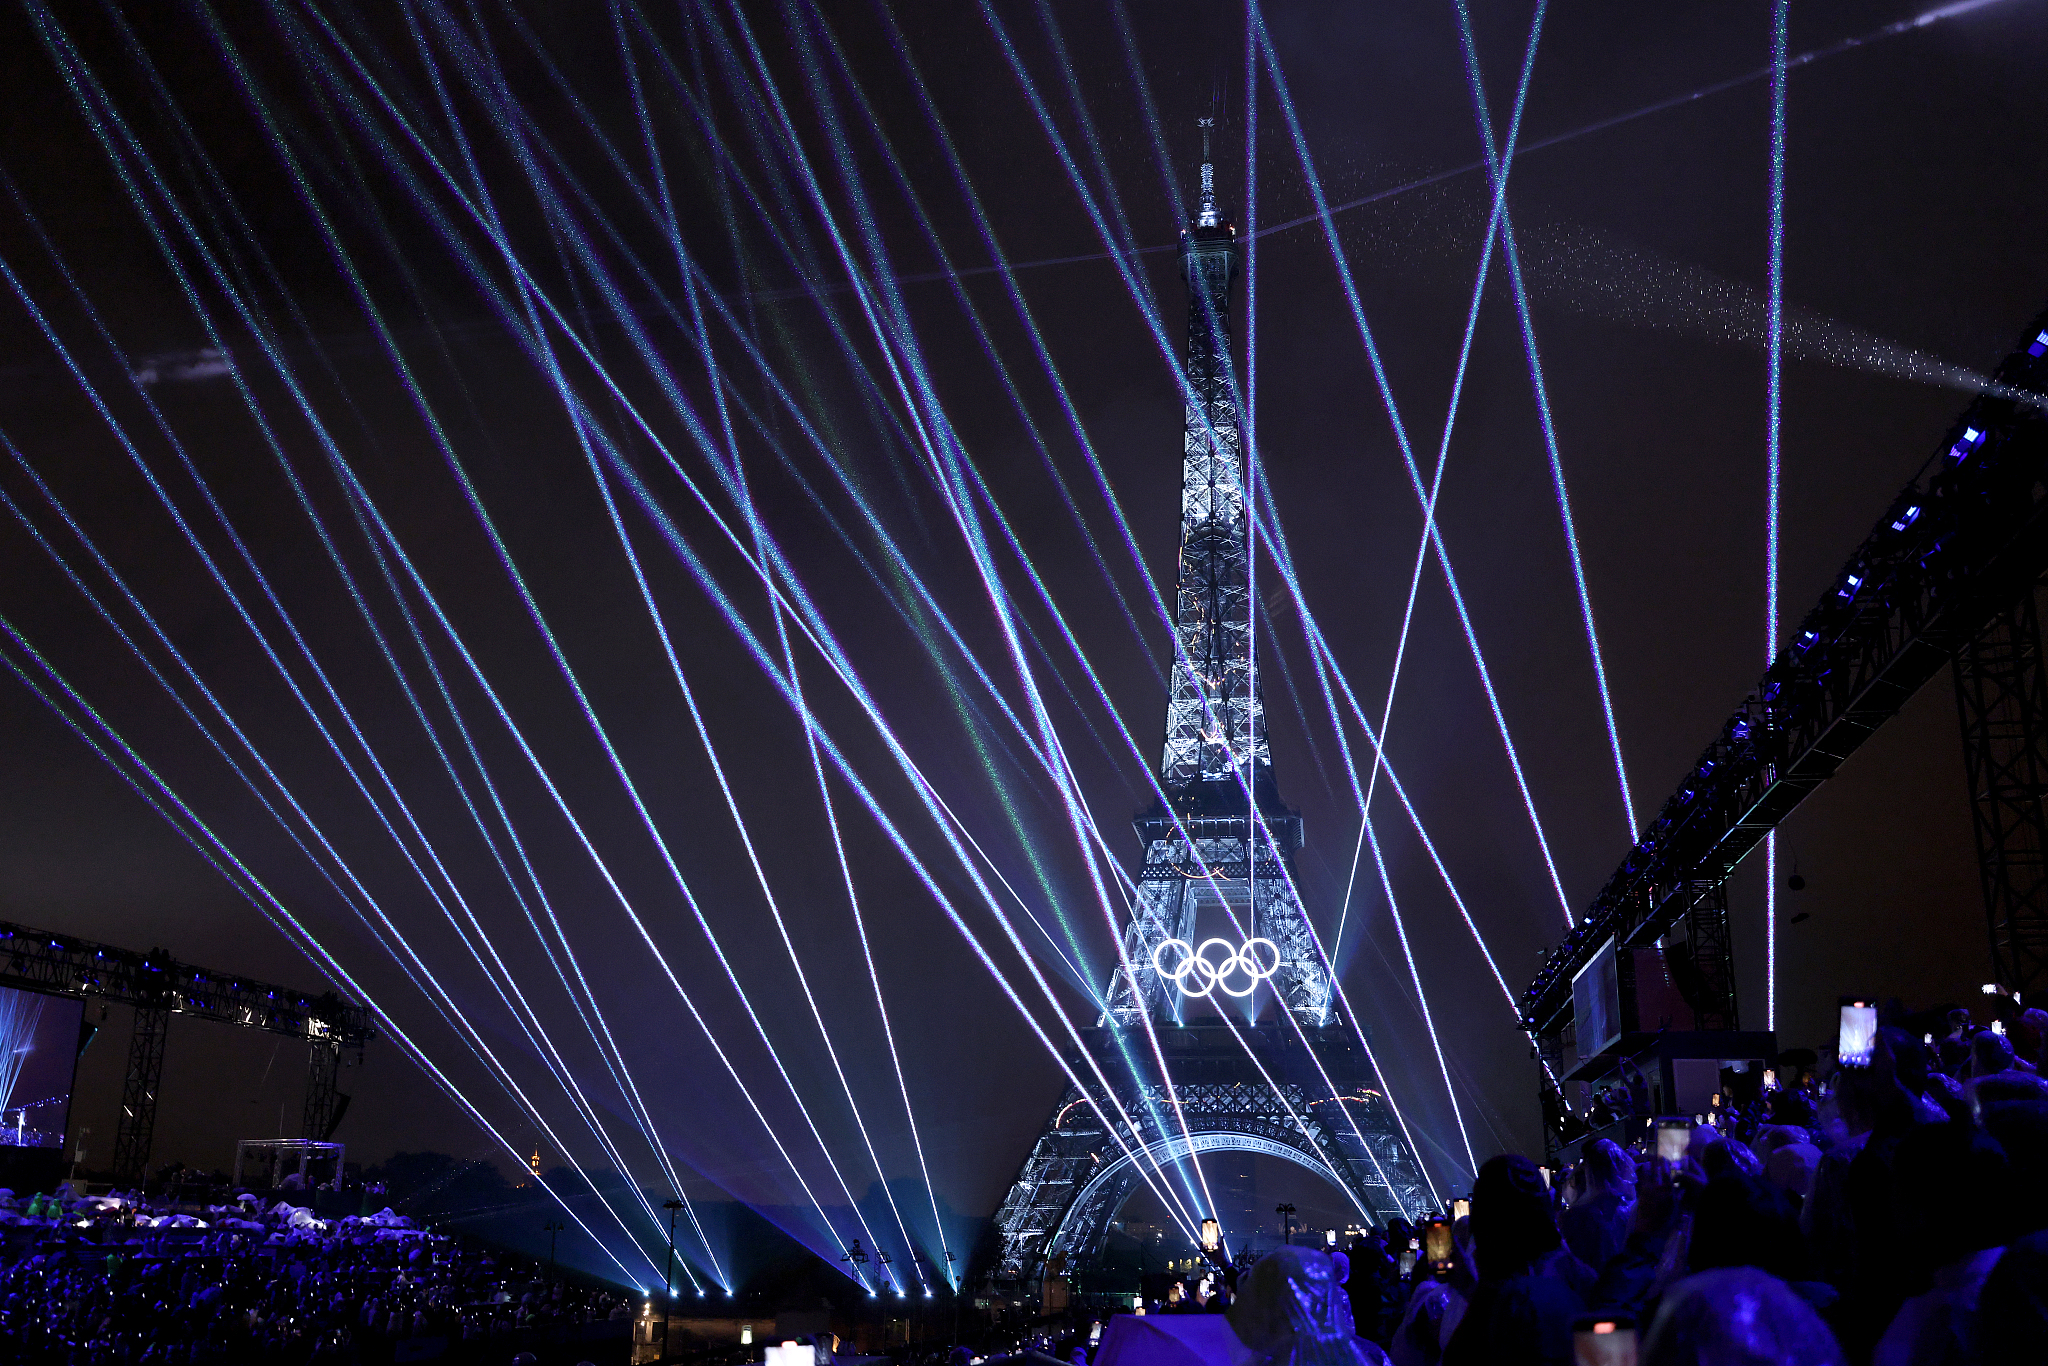 A light show illuminated the Eiffel Tower during the opening ceremony of the Paris 2024 Olympic Games in Paris, France, July 26, 2024. /CFP